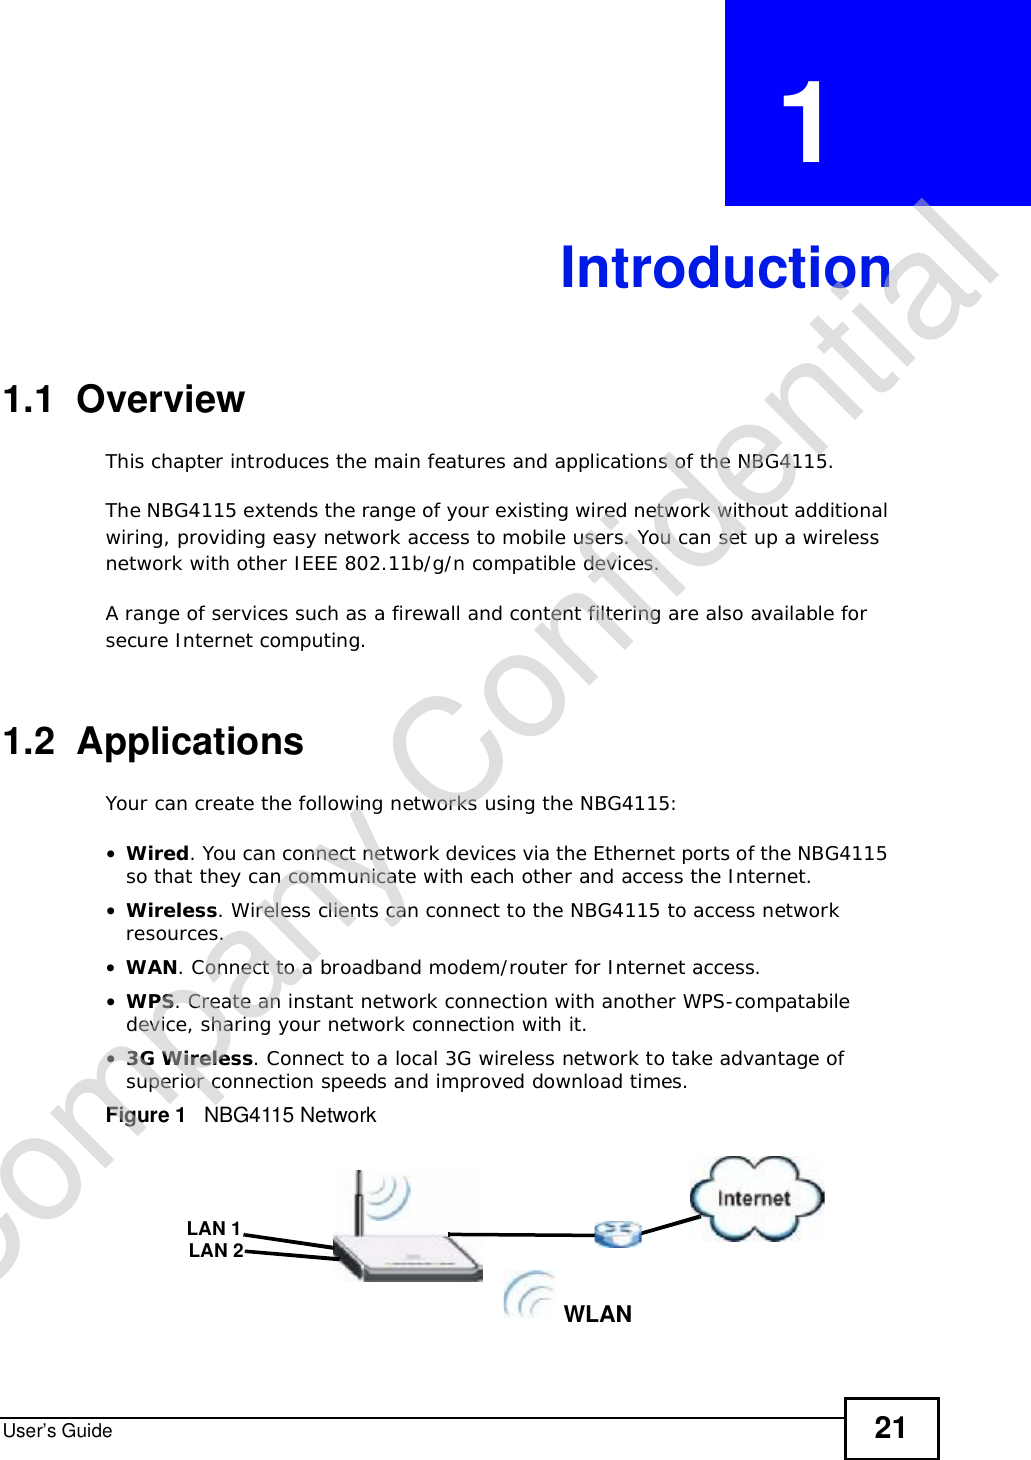 User’s Guide 21CHAPTER  1 Introduction1.1  OverviewThis chapter introduces the main features and applications of the NBG4115.The NBG4115 extends the range of your existing wired network without additional wiring, providing easy network access to mobile users. You can set up a wireless network with other IEEE 802.11b/g/n compatible devices.A range of services such as a firewall and content filtering are also available for secure Internet computing. 1.2  ApplicationsYour can create the following networks using the NBG4115:•Wired. You can connect network devices via the Ethernet ports of the NBG4115 so that they can communicate with each other and access the Internet.•Wireless. Wireless clients can connect to the NBG4115 to access network resources.•WAN. Connect to a broadband modem/router for Internet access.•WPS. Create an instant network connection with another WPS-compatabile device, sharing your network connection with it.•3G Wireless. Connect to a local 3G wireless network to take advantage of superior connection speeds and improved download times.Figure 1   NBG4115 NetworkWLANLAN 1LAN 2Company Confidential